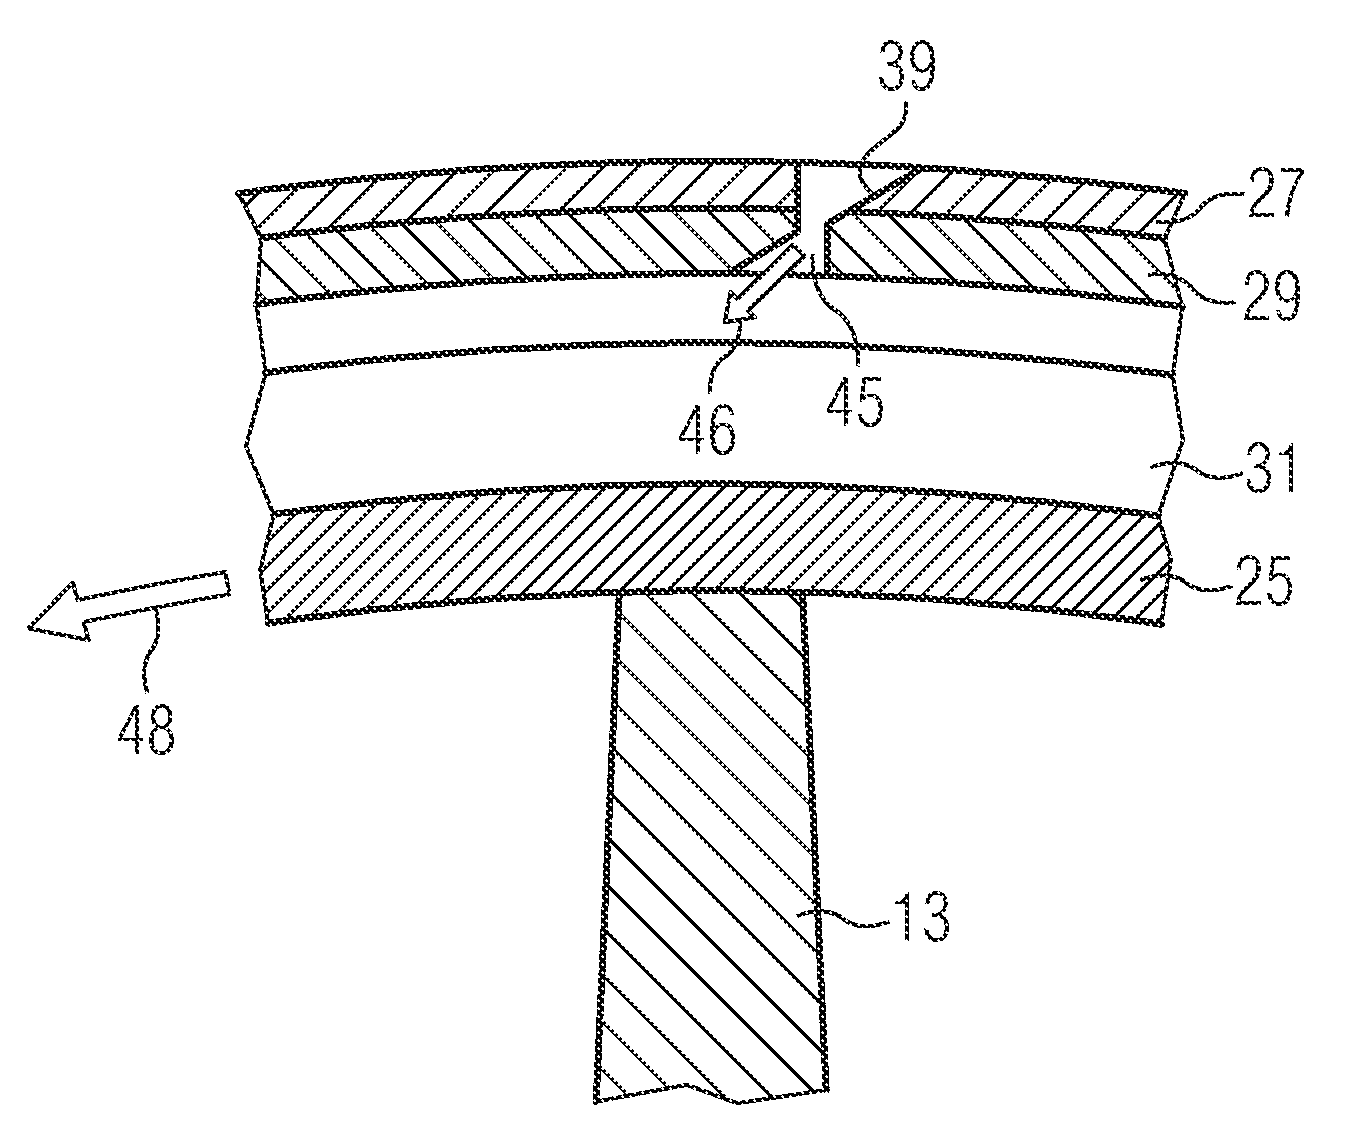 Turbine arrangement and method of cooling a shroud located at the tip of a turbine blade